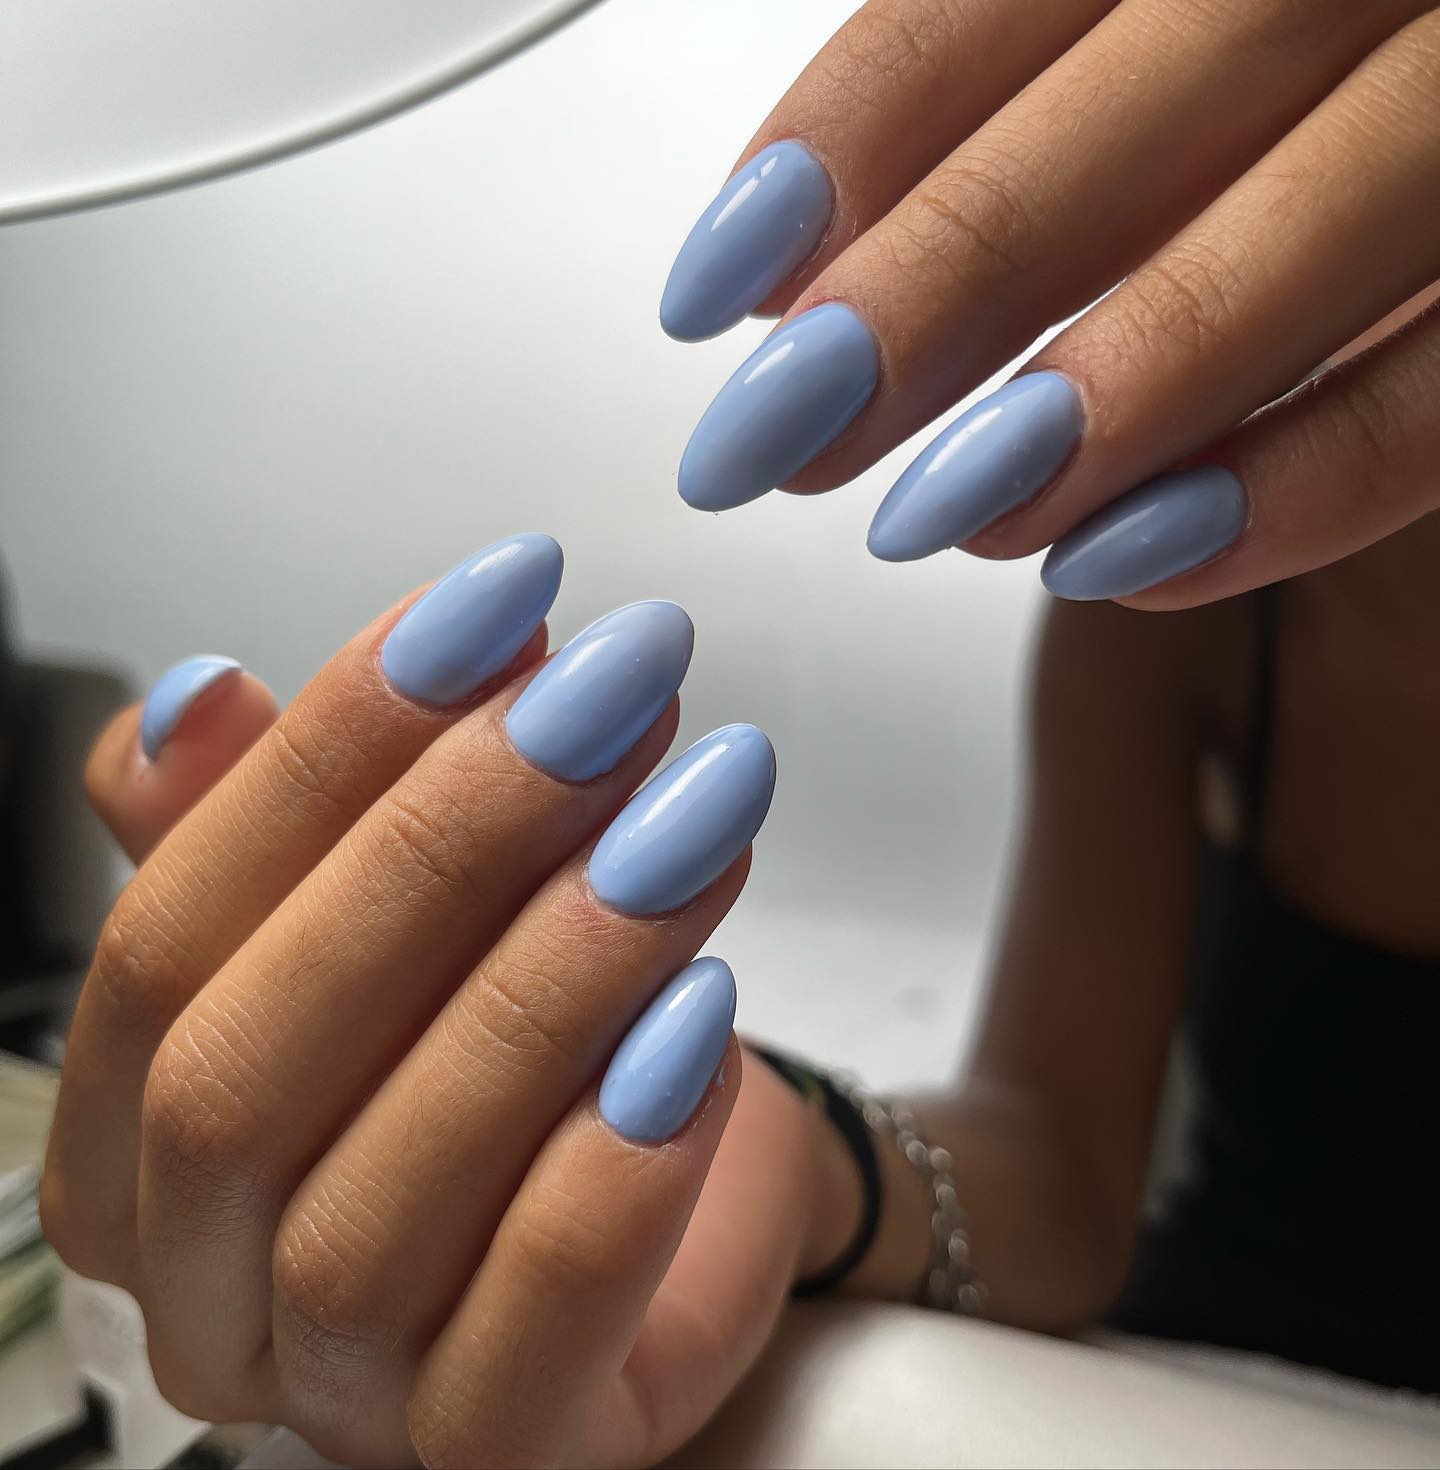 In order to get a simple look, you can try this perfect shade of blue with your almond shape nails.